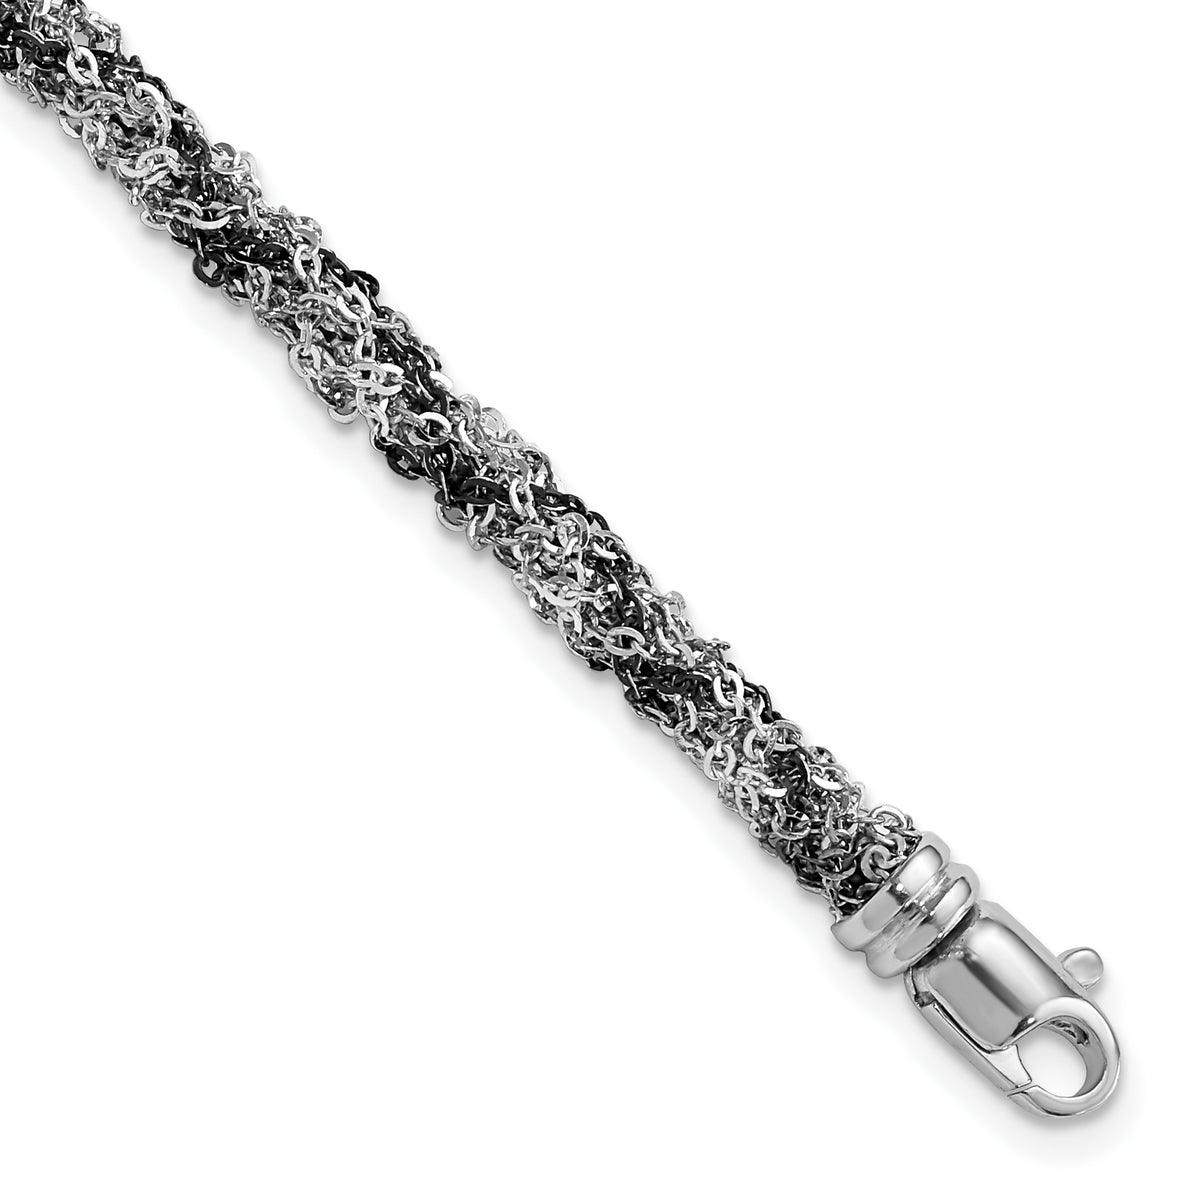 Sterling Silver & Ruthenium-plated Twisted Chain Bracelet